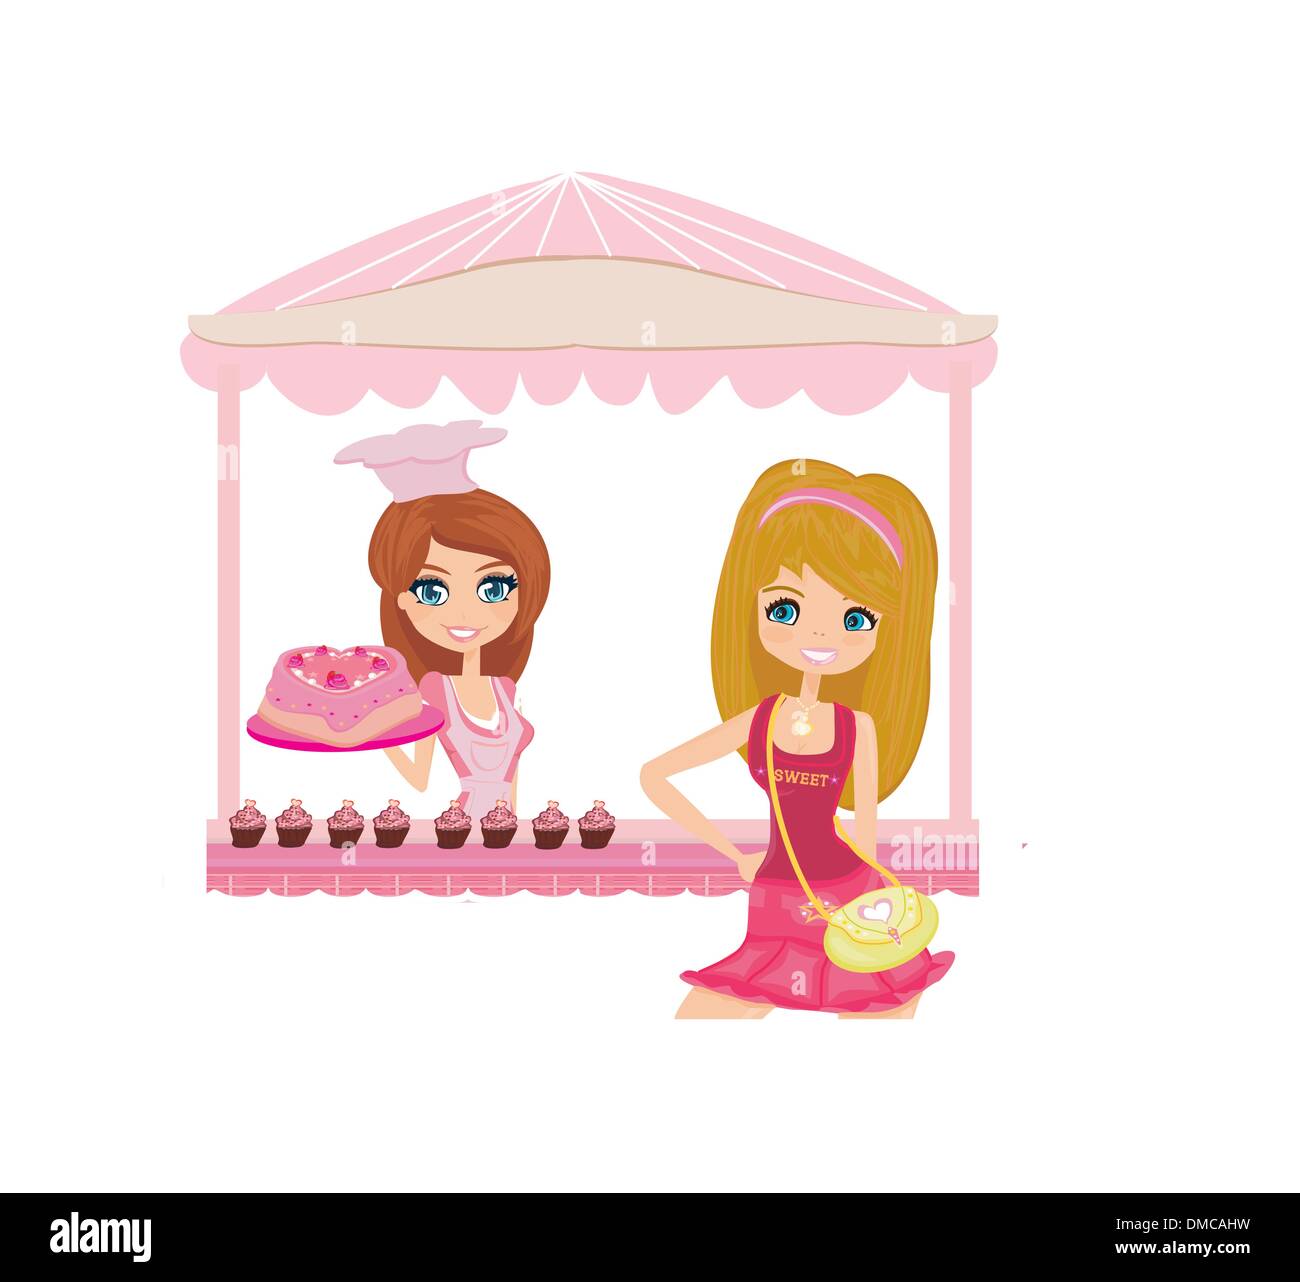 illustration of a woman buying cake at a bakery store Stock Vector